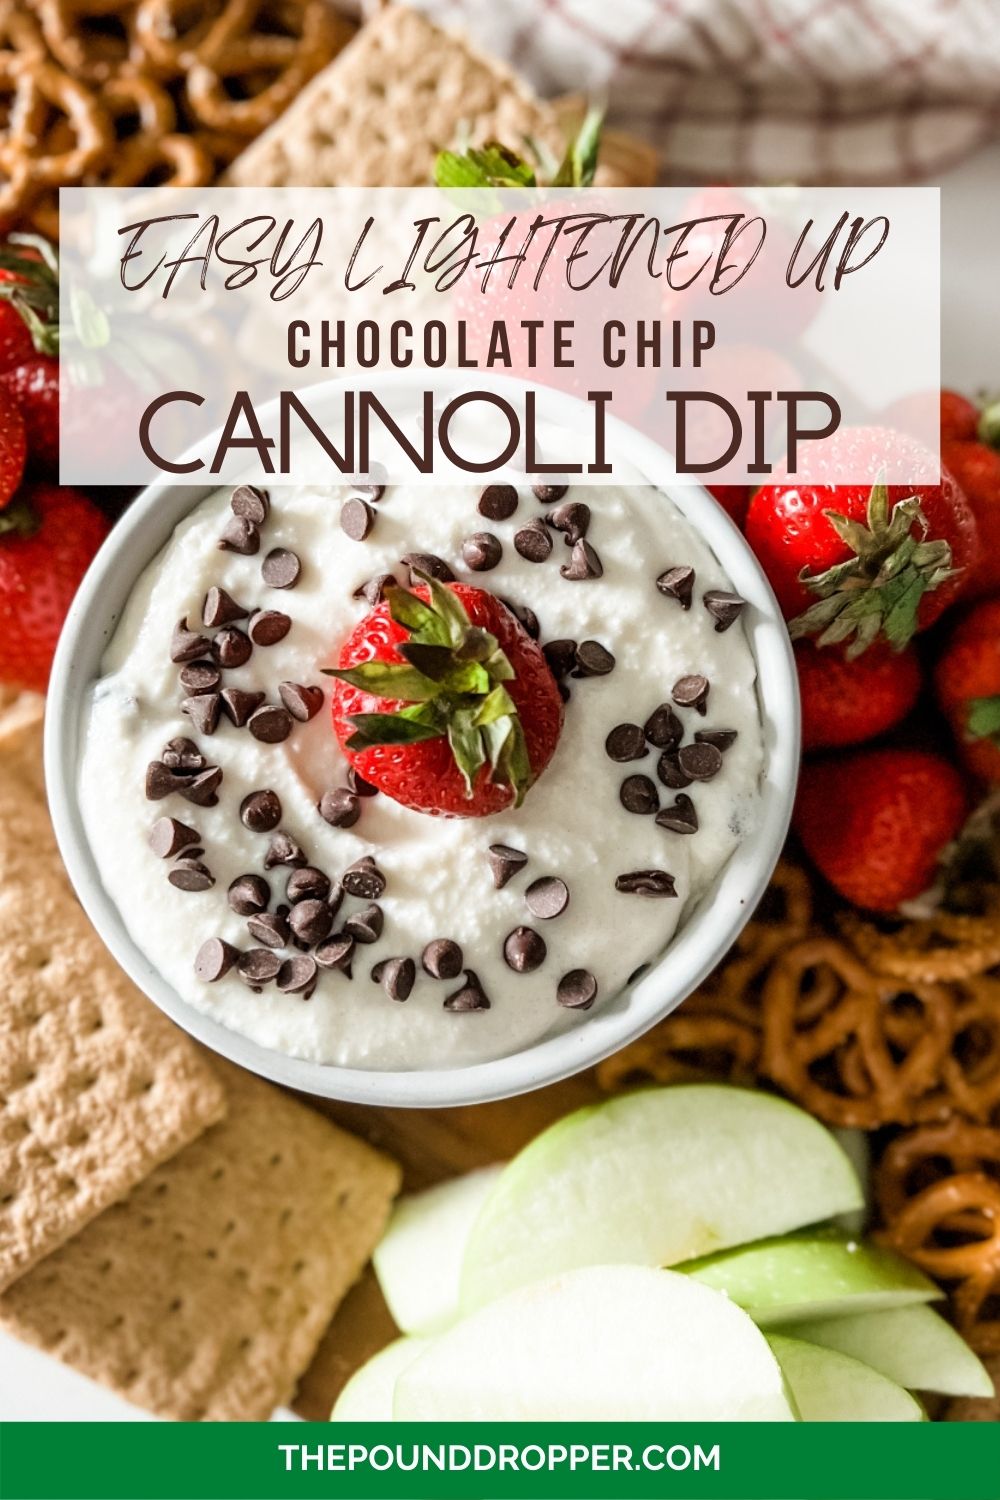 This Easy Lightened Up Chocolate Chip Cannoli Dip has been lightened up using fat-free or light ricotta cheese, light cool whip, monk-fruit powdered sugar sweetener, and vanilla. Easy to make and ridiculously delicious! via @pounddropper